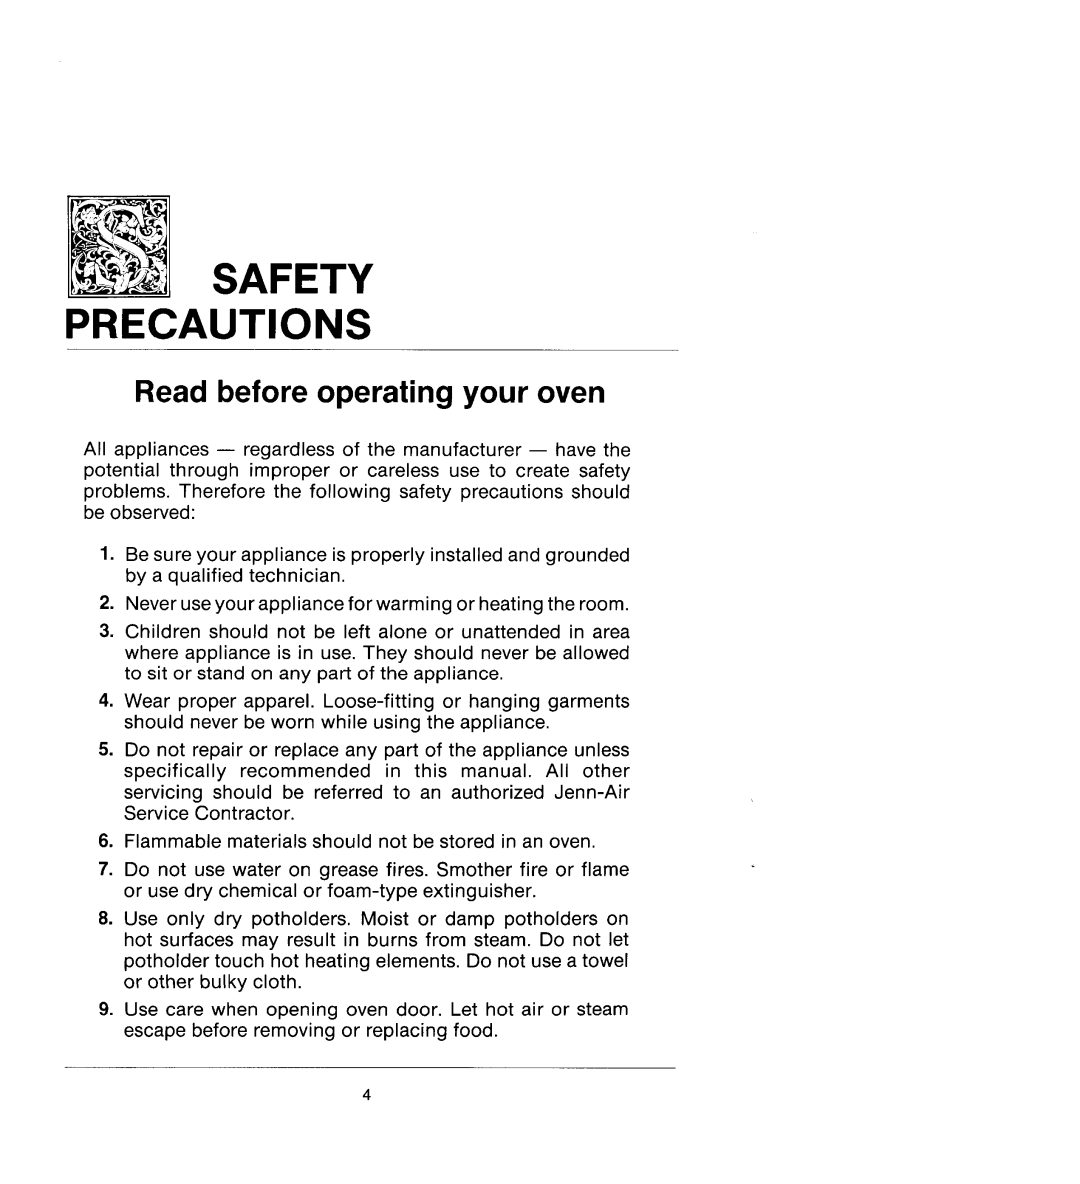 Jenn-Air W106, W206, WM236, WM227, W136 manual Safety Precautions, Read before operating your oven 